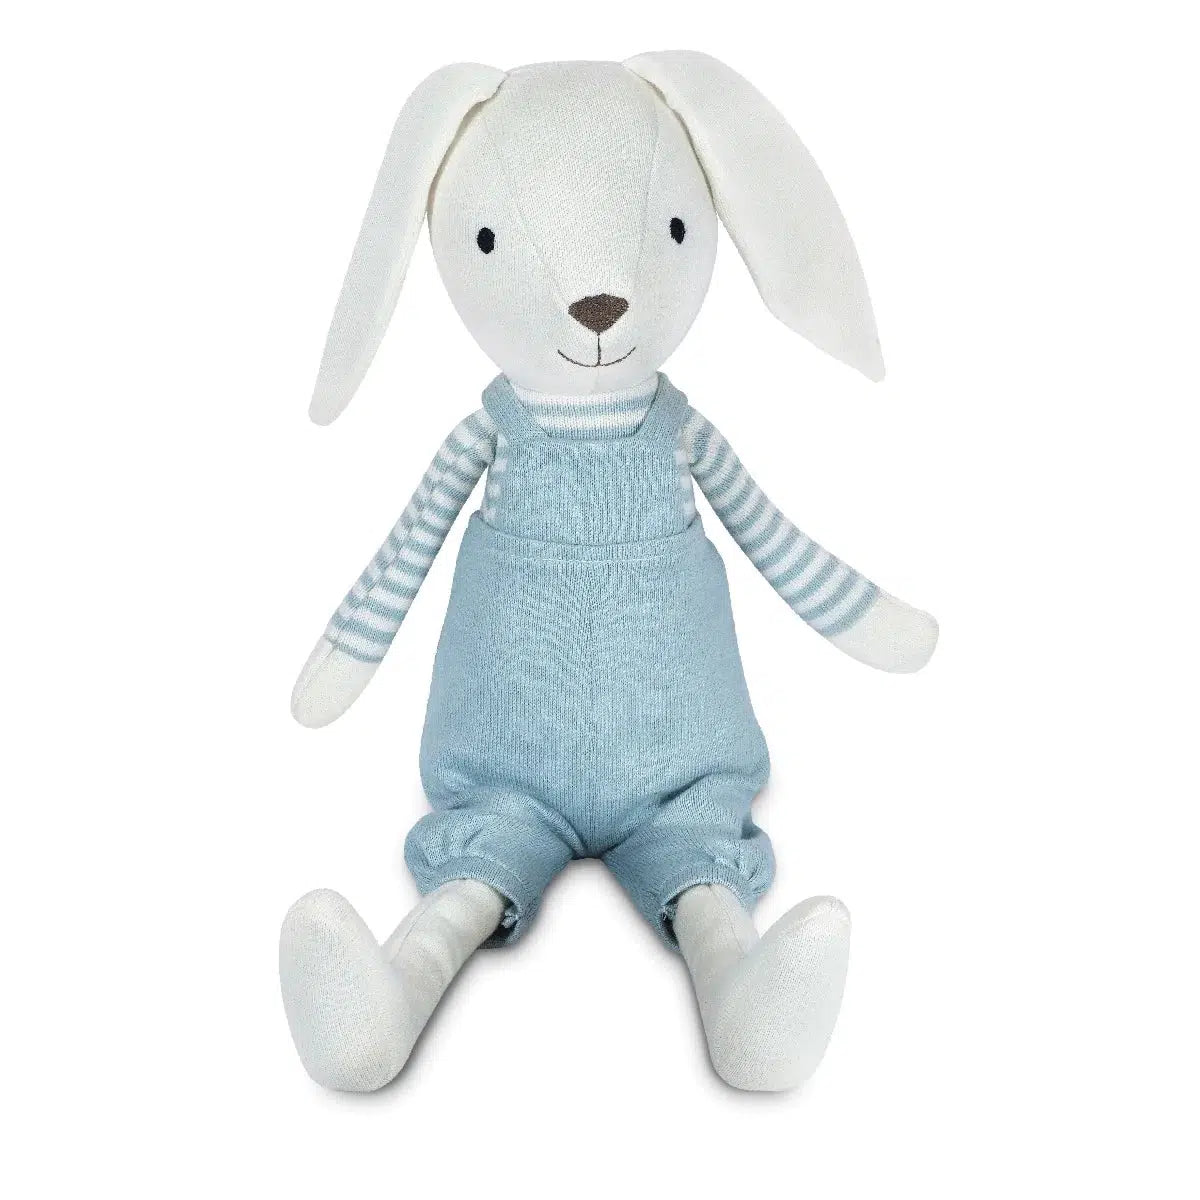 Front view of Knit Bunny Plush-Finn sitting.